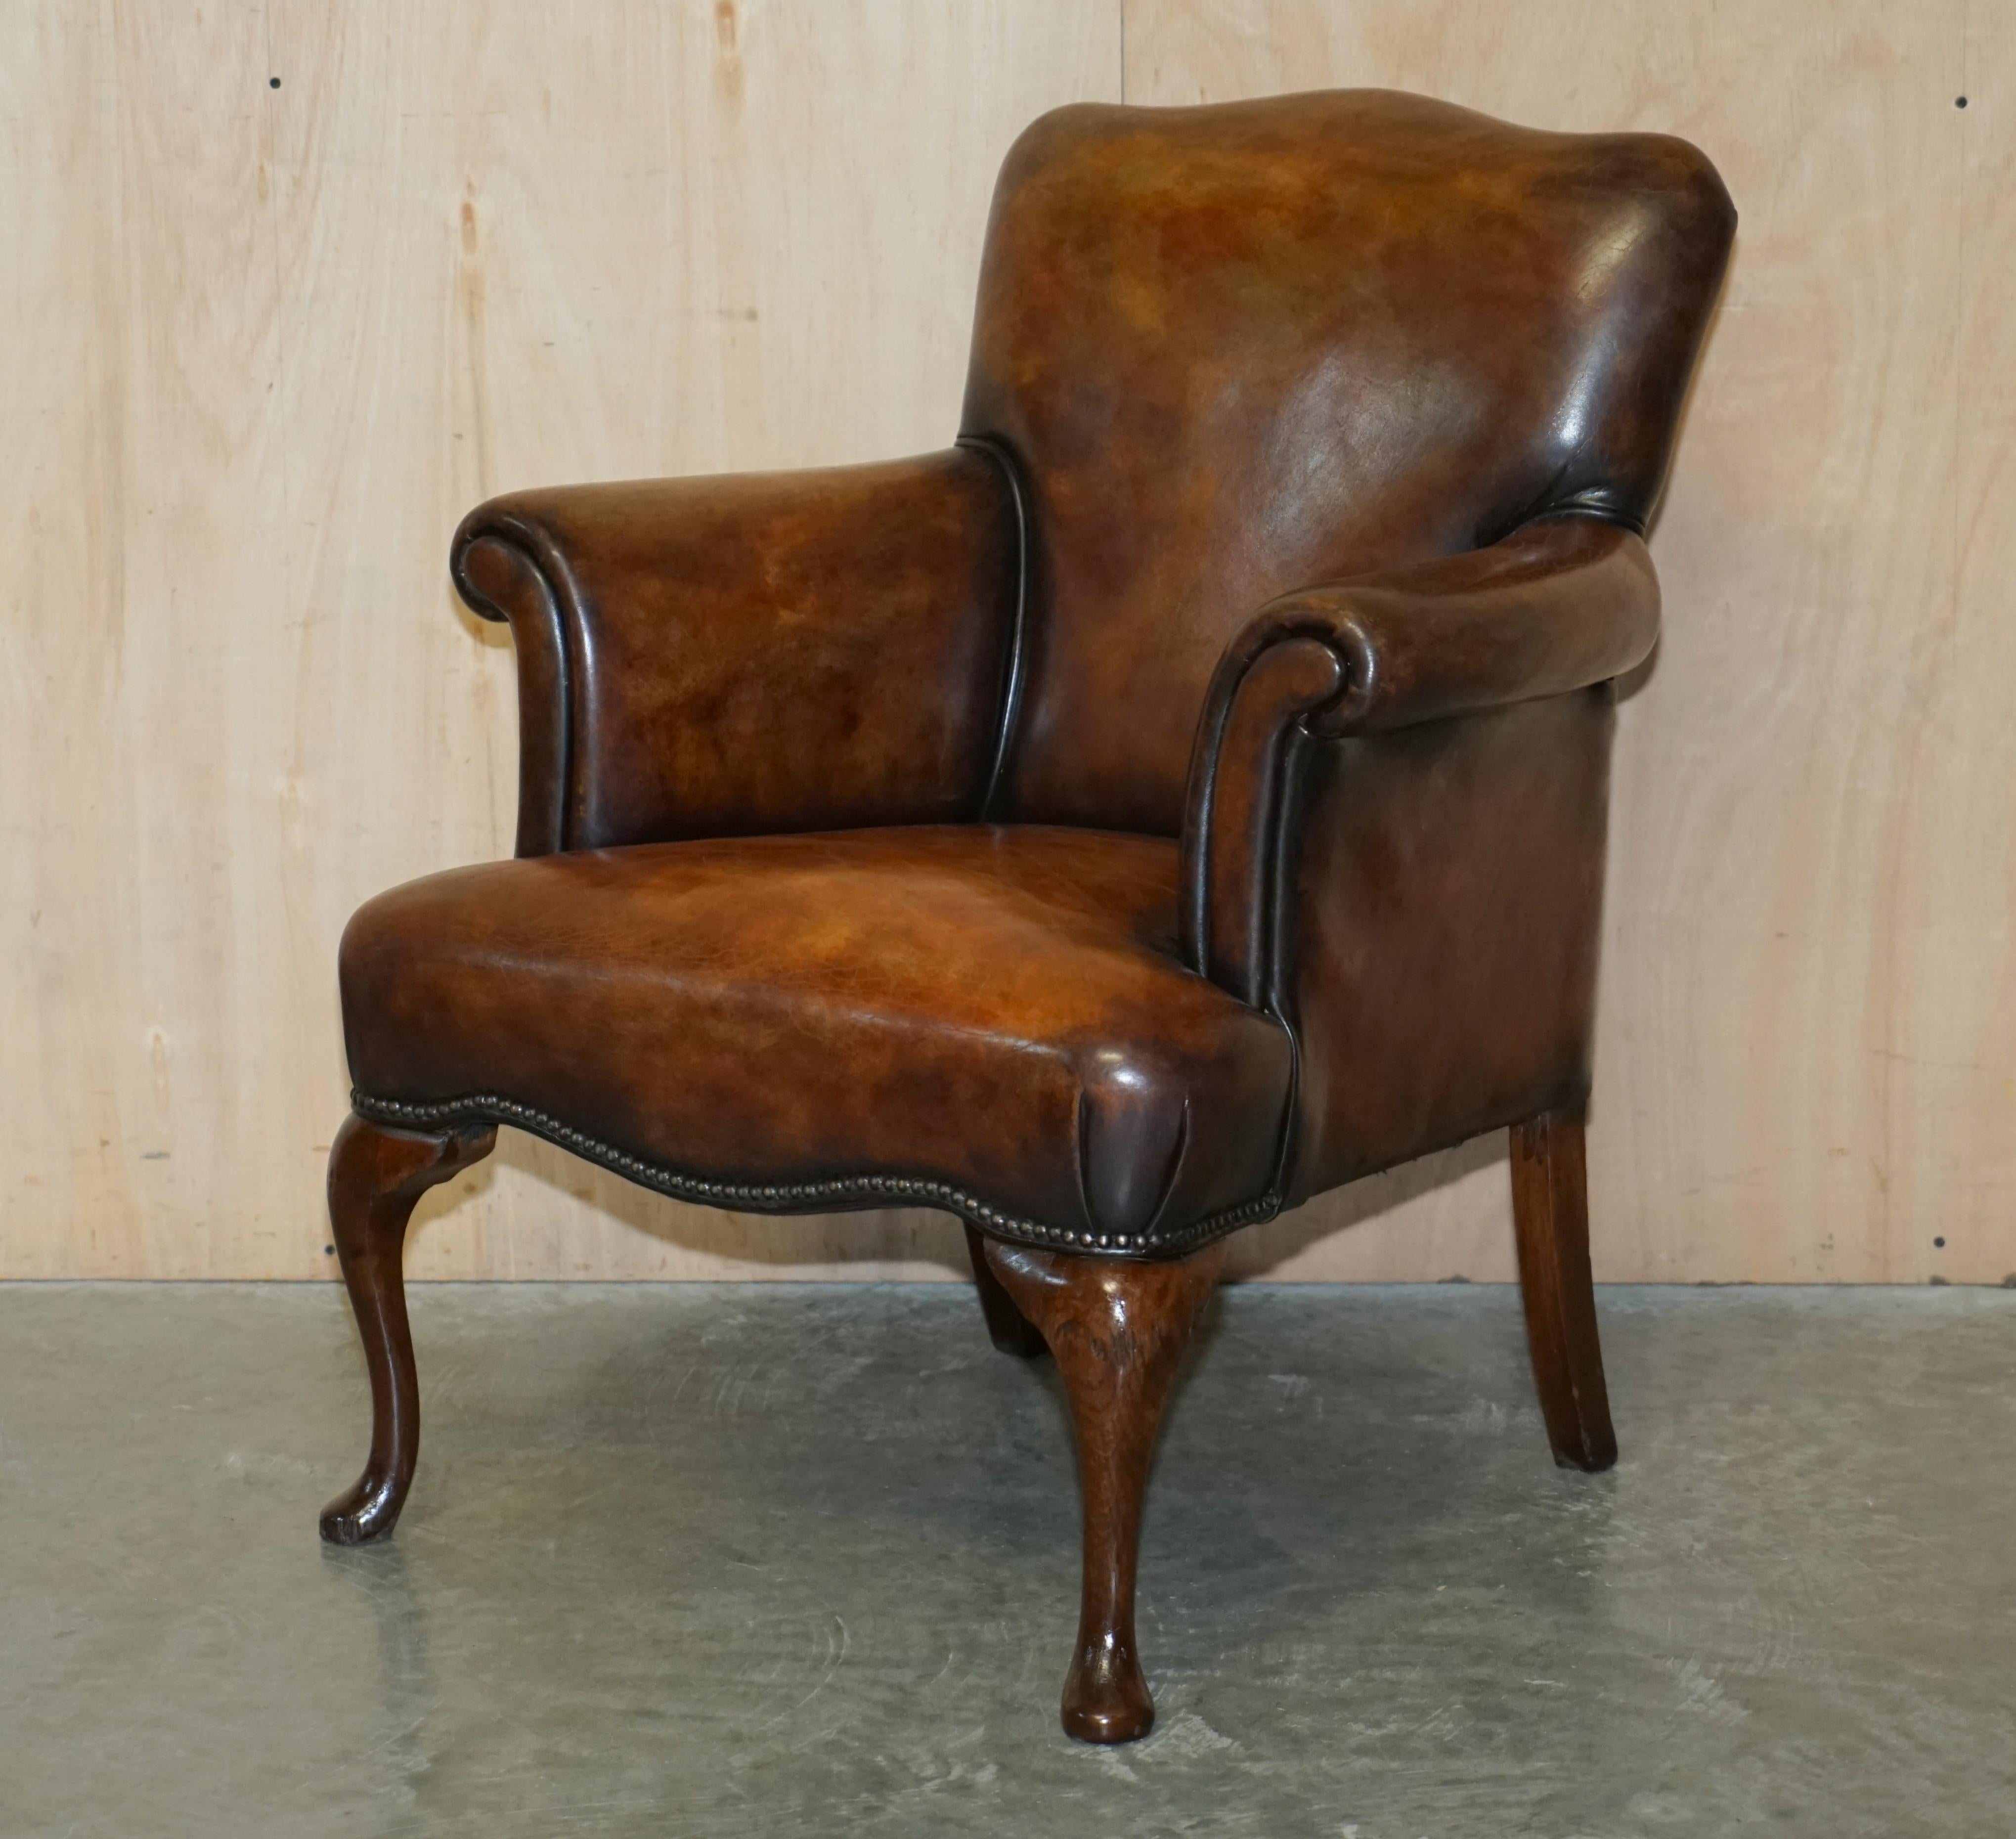 We are delighted to offer for sale this very well made pair of Antique Art Deco club armchairs, hand dyed this one of a kind cigar brown colour with solid English oak cabriolet legs

This is one of the most impressive pairs of armchairs I have